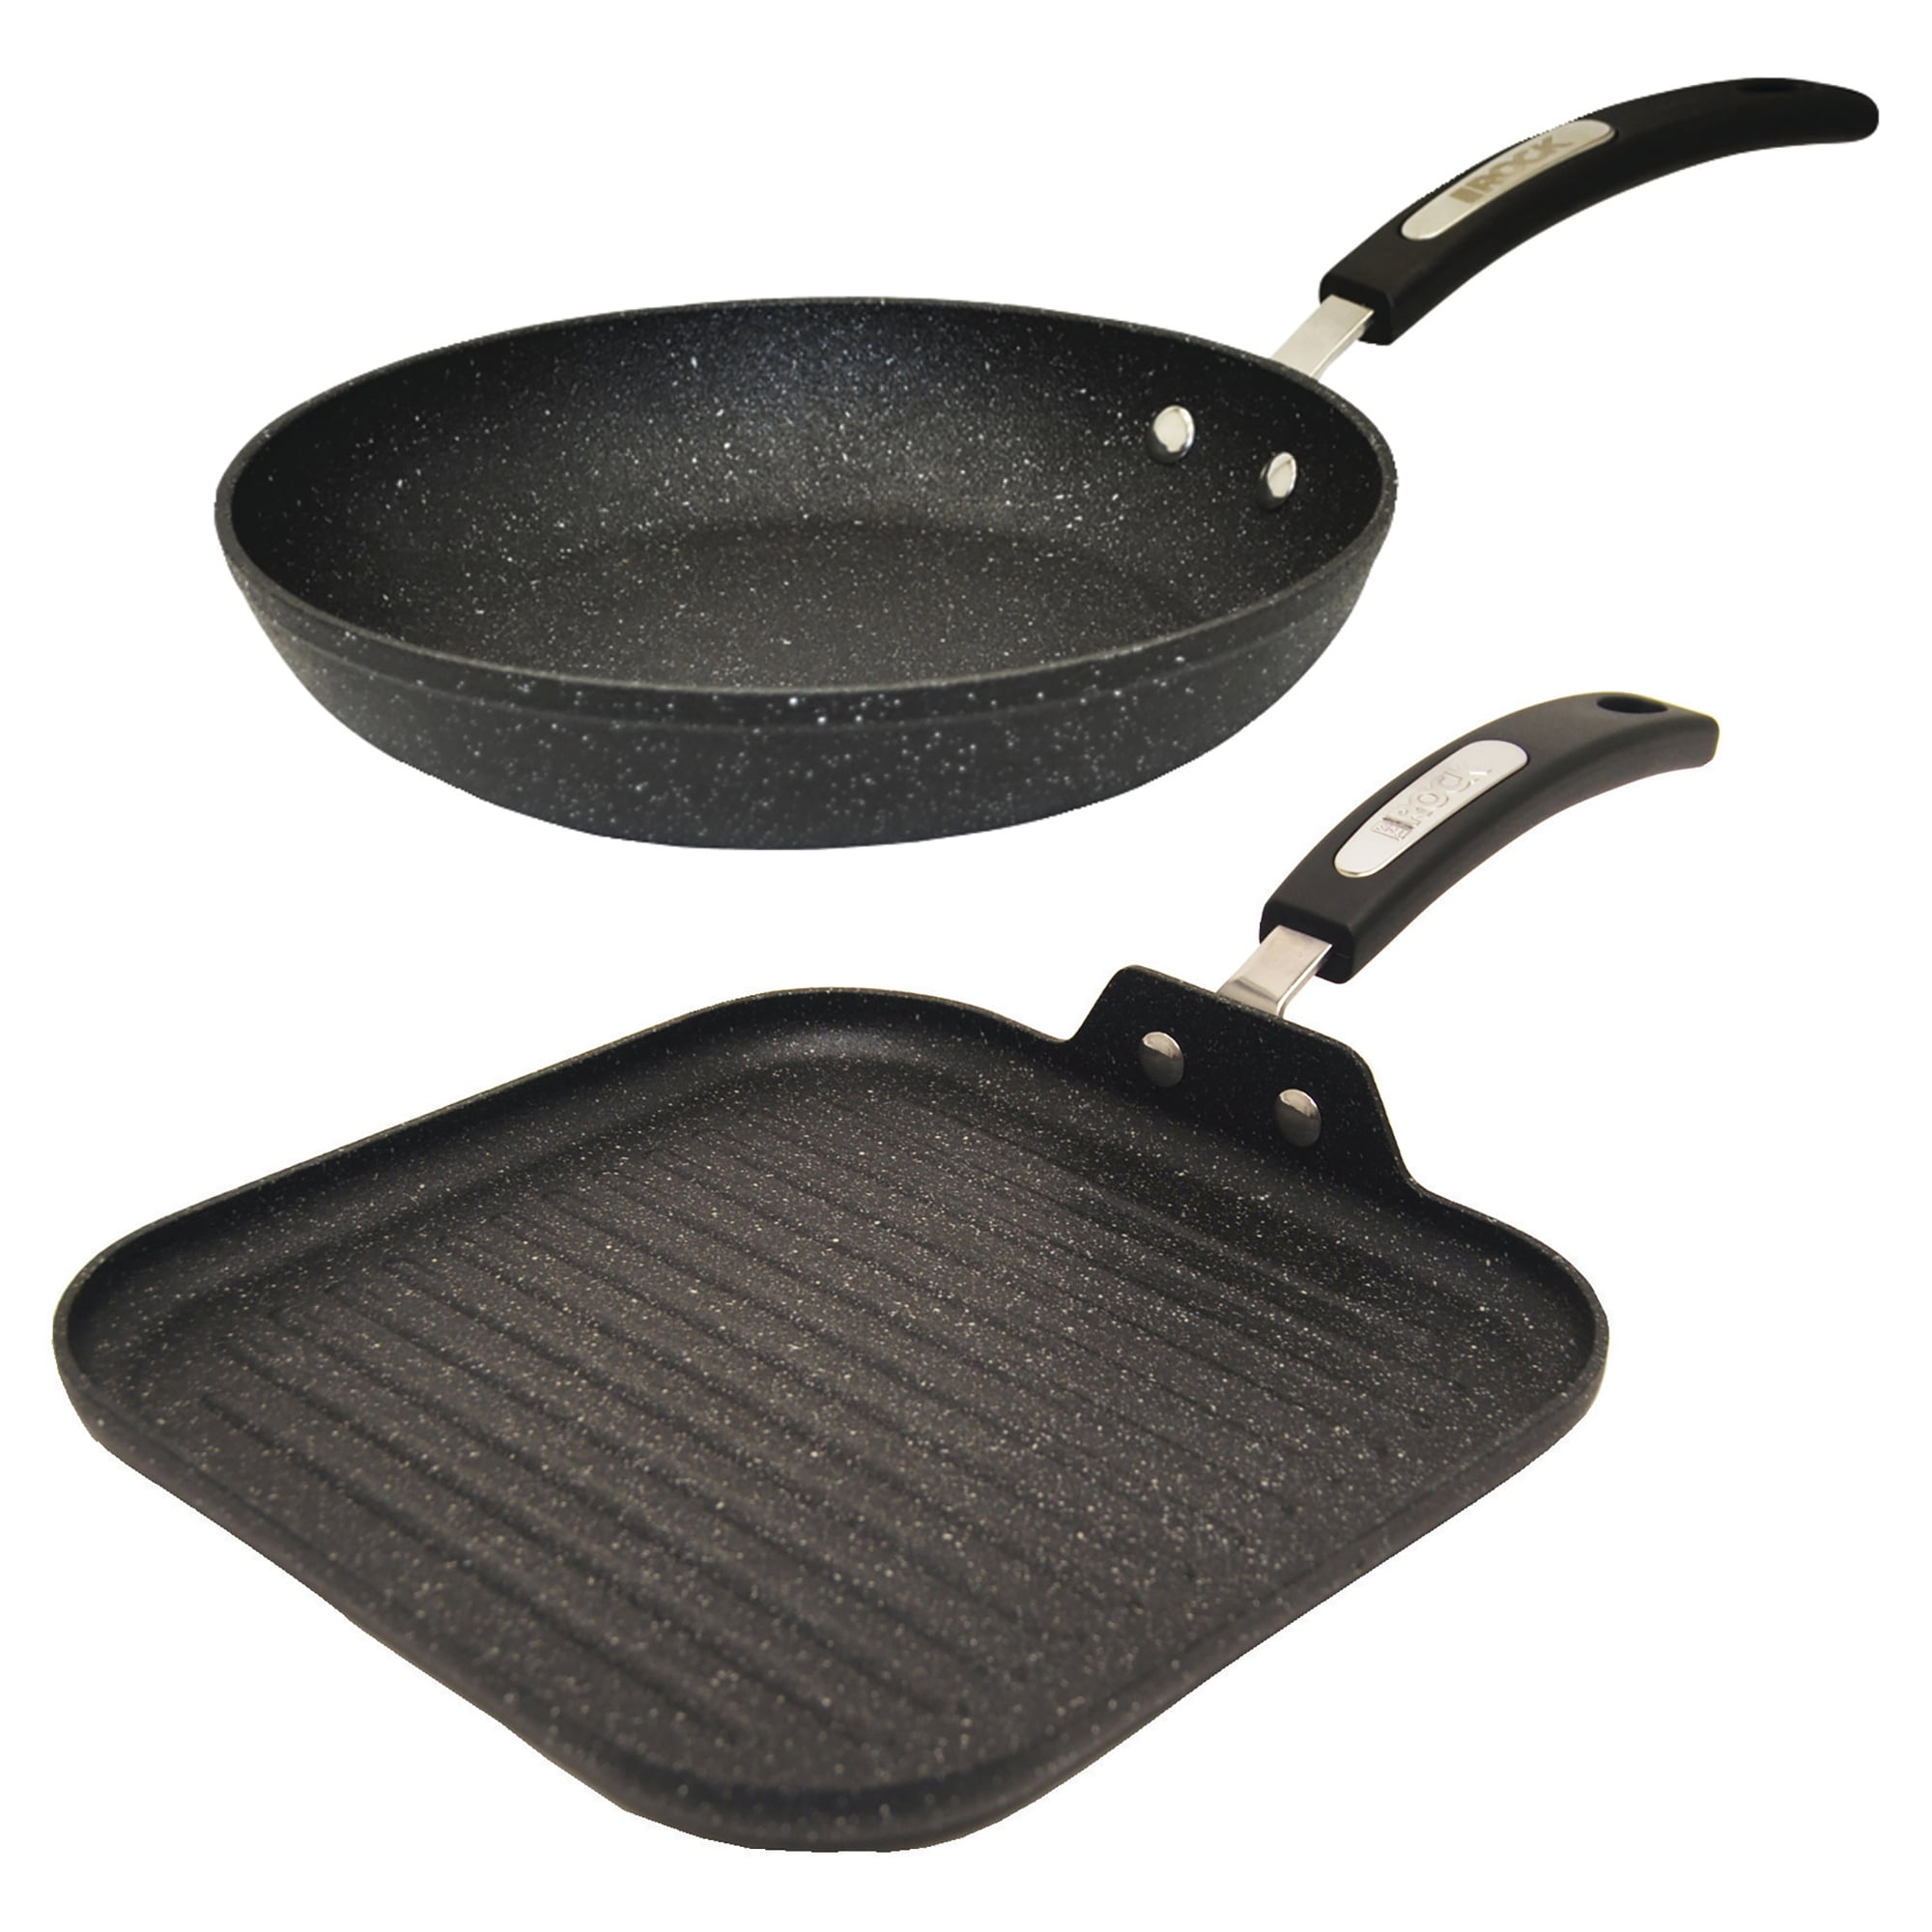 The Rock By Starfrit Aluminum Non Stick 11'' Frying Pan & Reviews